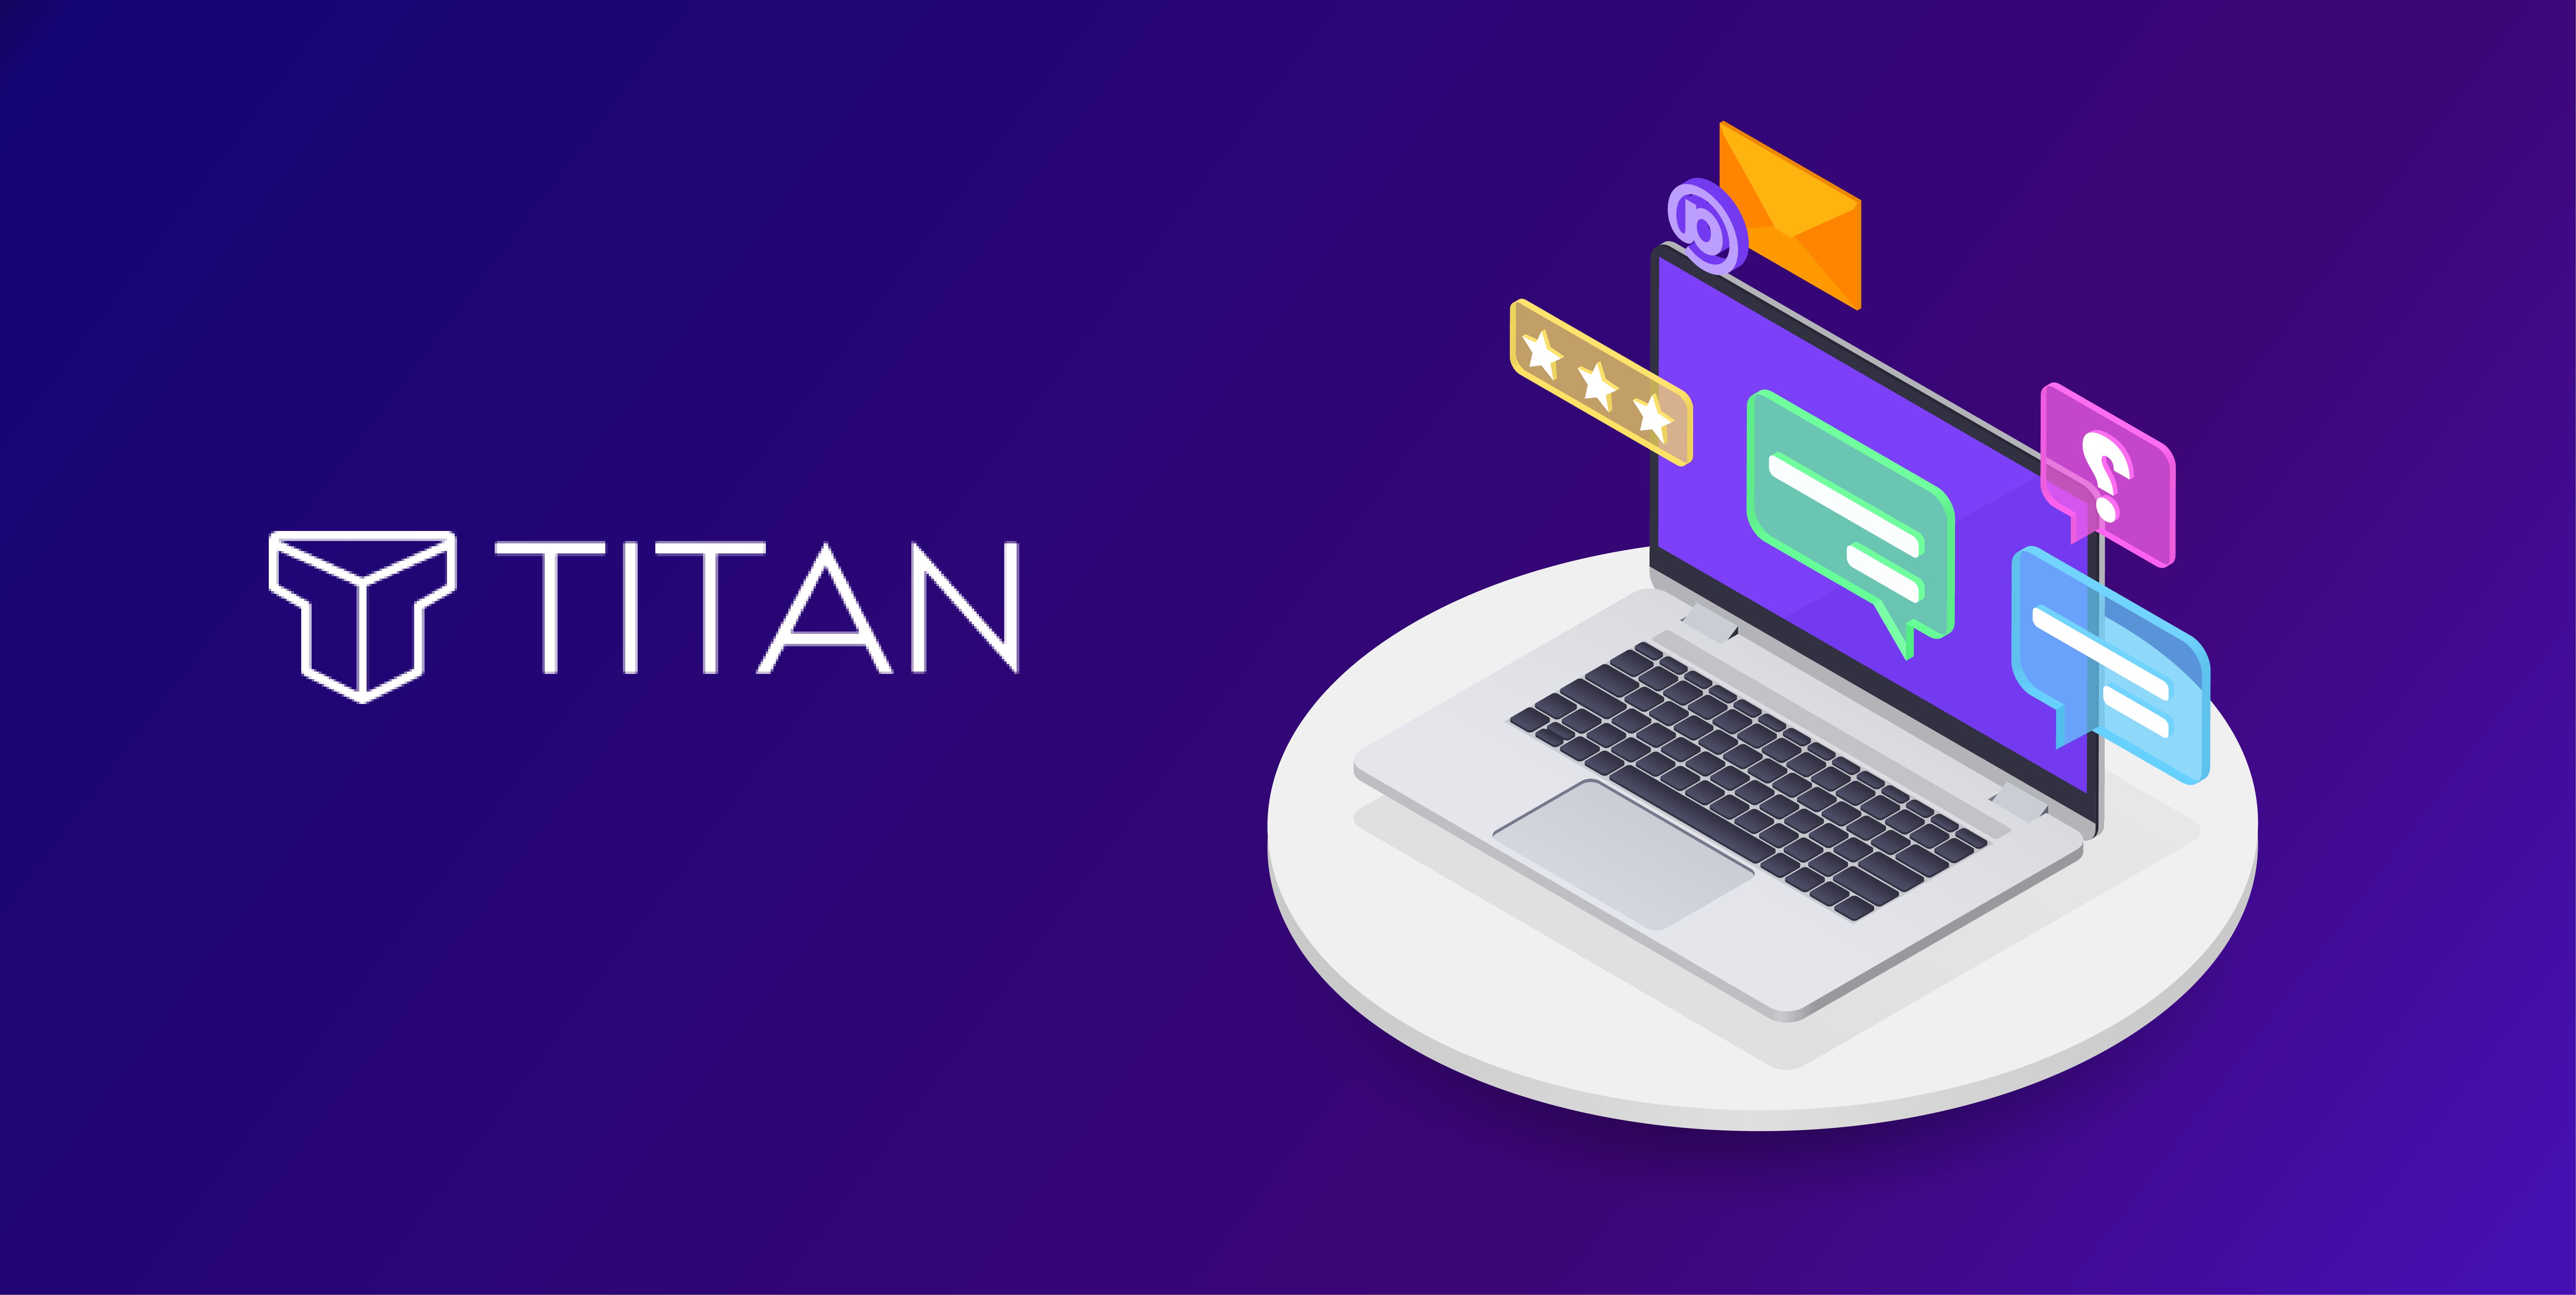 What is Titan?